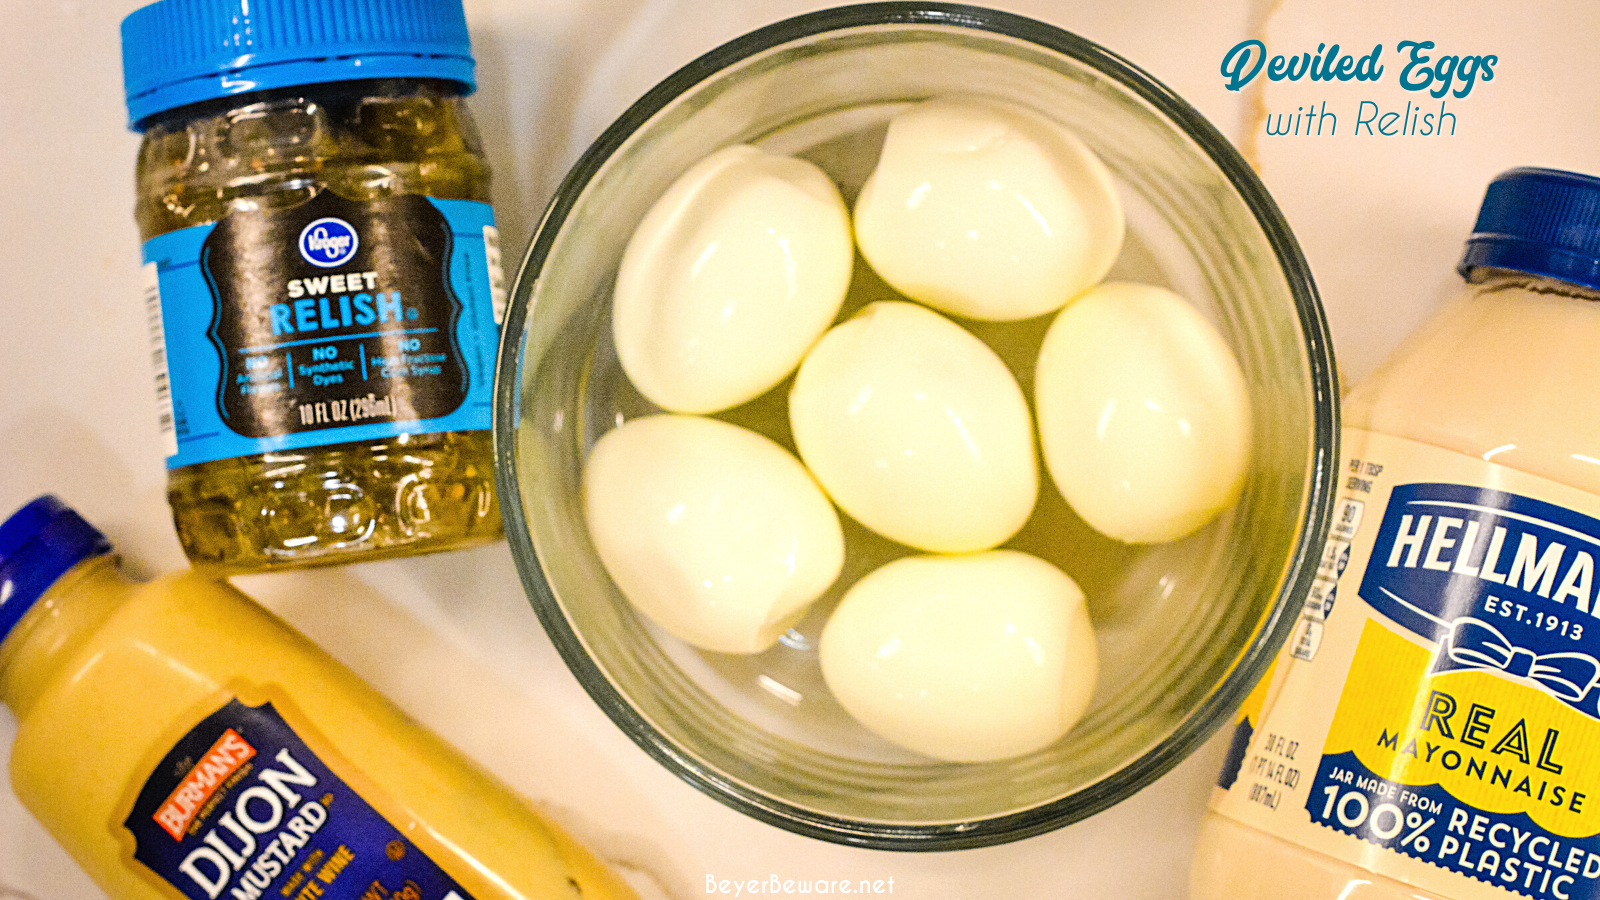 Deviled Egg Ingredients - Mayonnaise, mustard, relish and hard boiled eggs